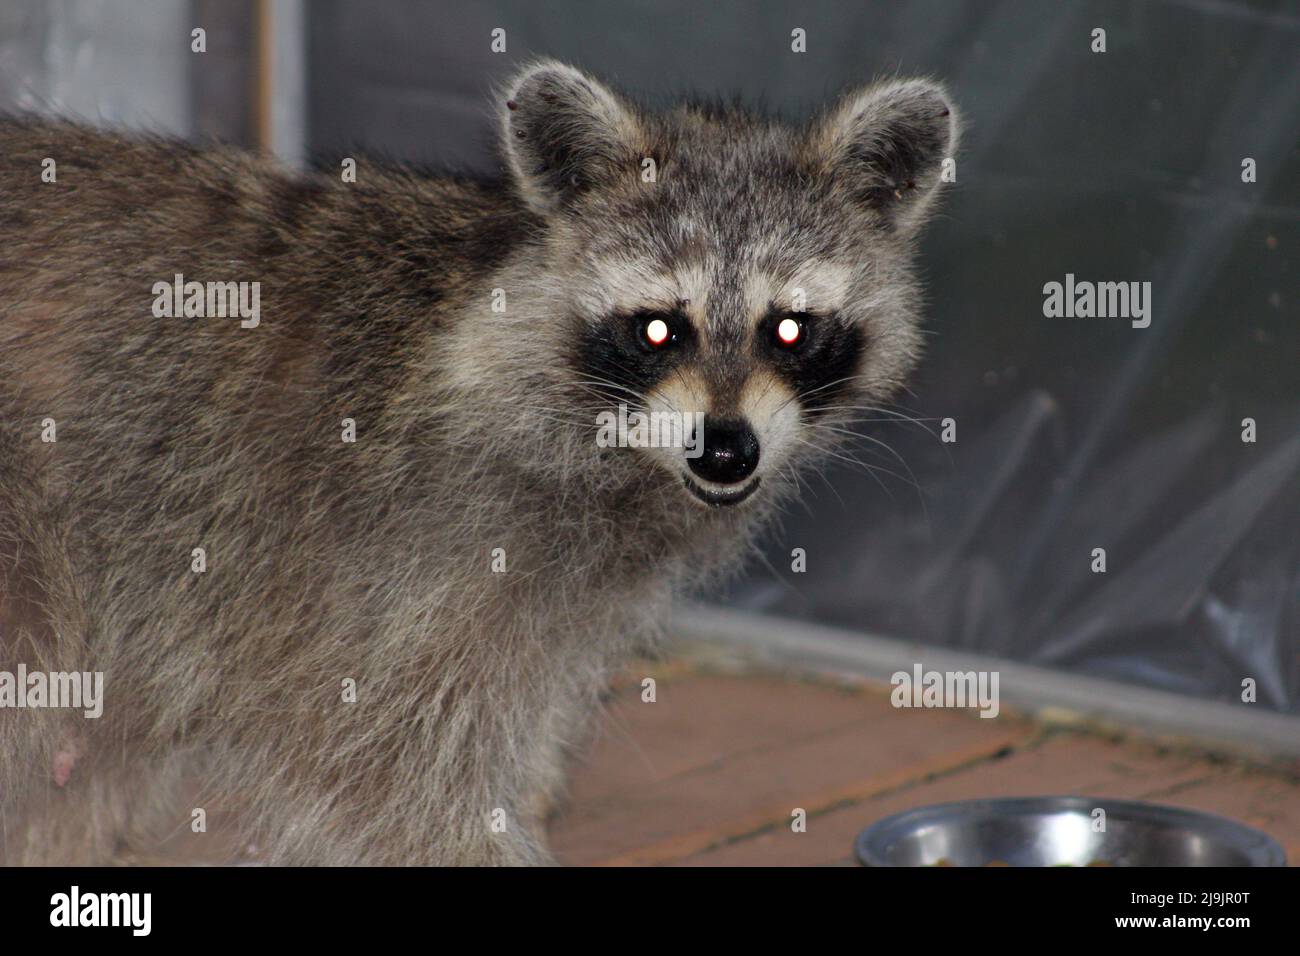 A Young Mother Raccoon Looking for Food on the Deck Stock Photo